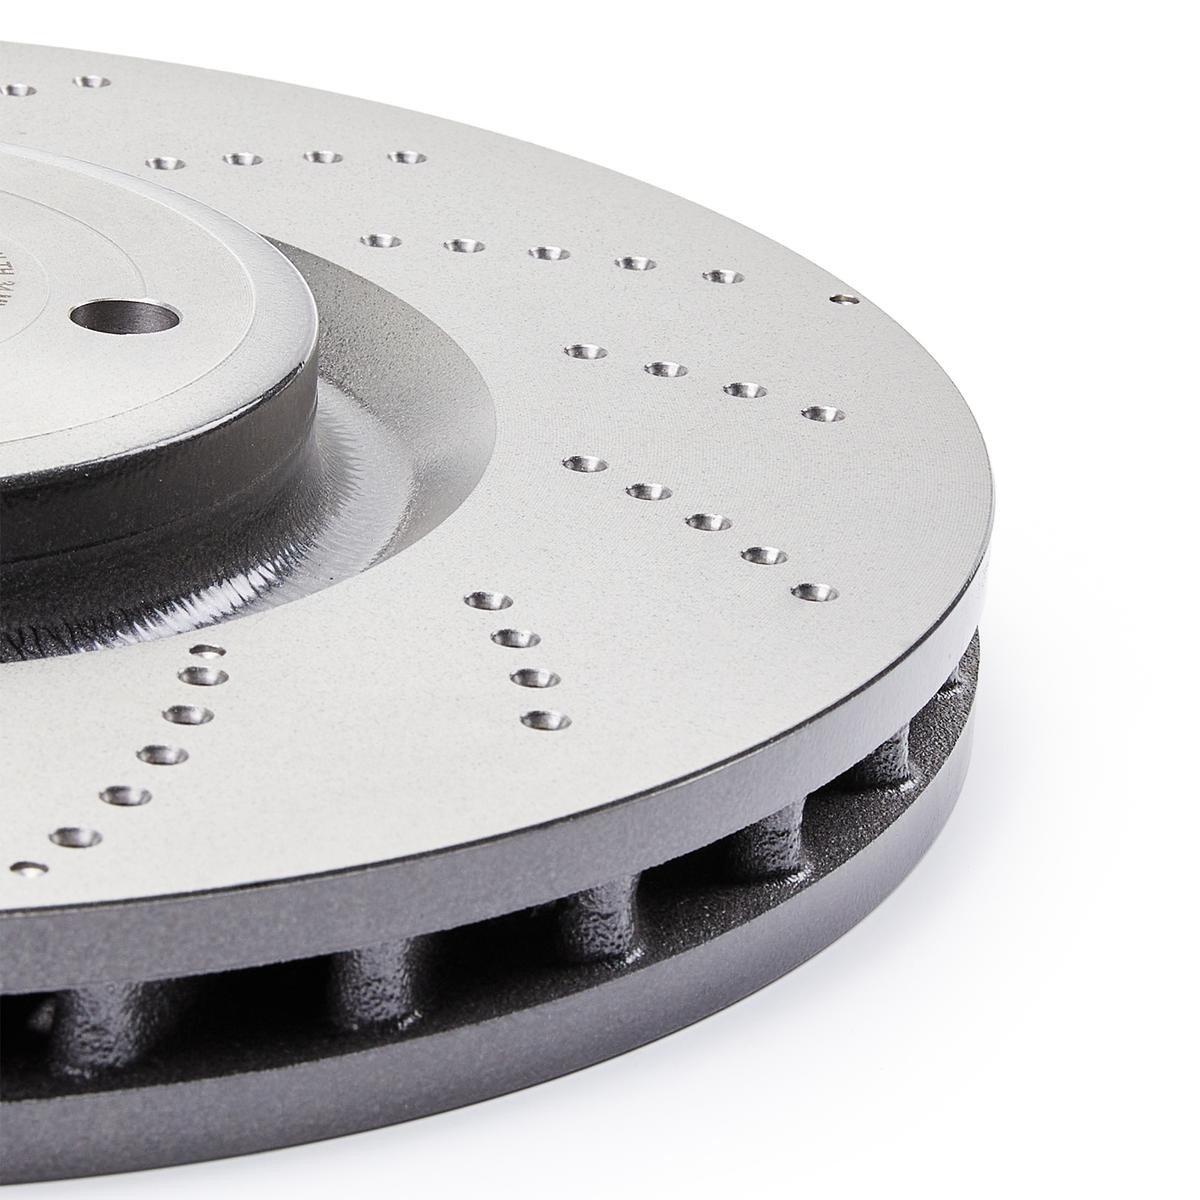 09.B747.51 Brake discs 09.B747.51 BREMBO 360x36mm, 5, perforated/vented, Coated, High-carbon